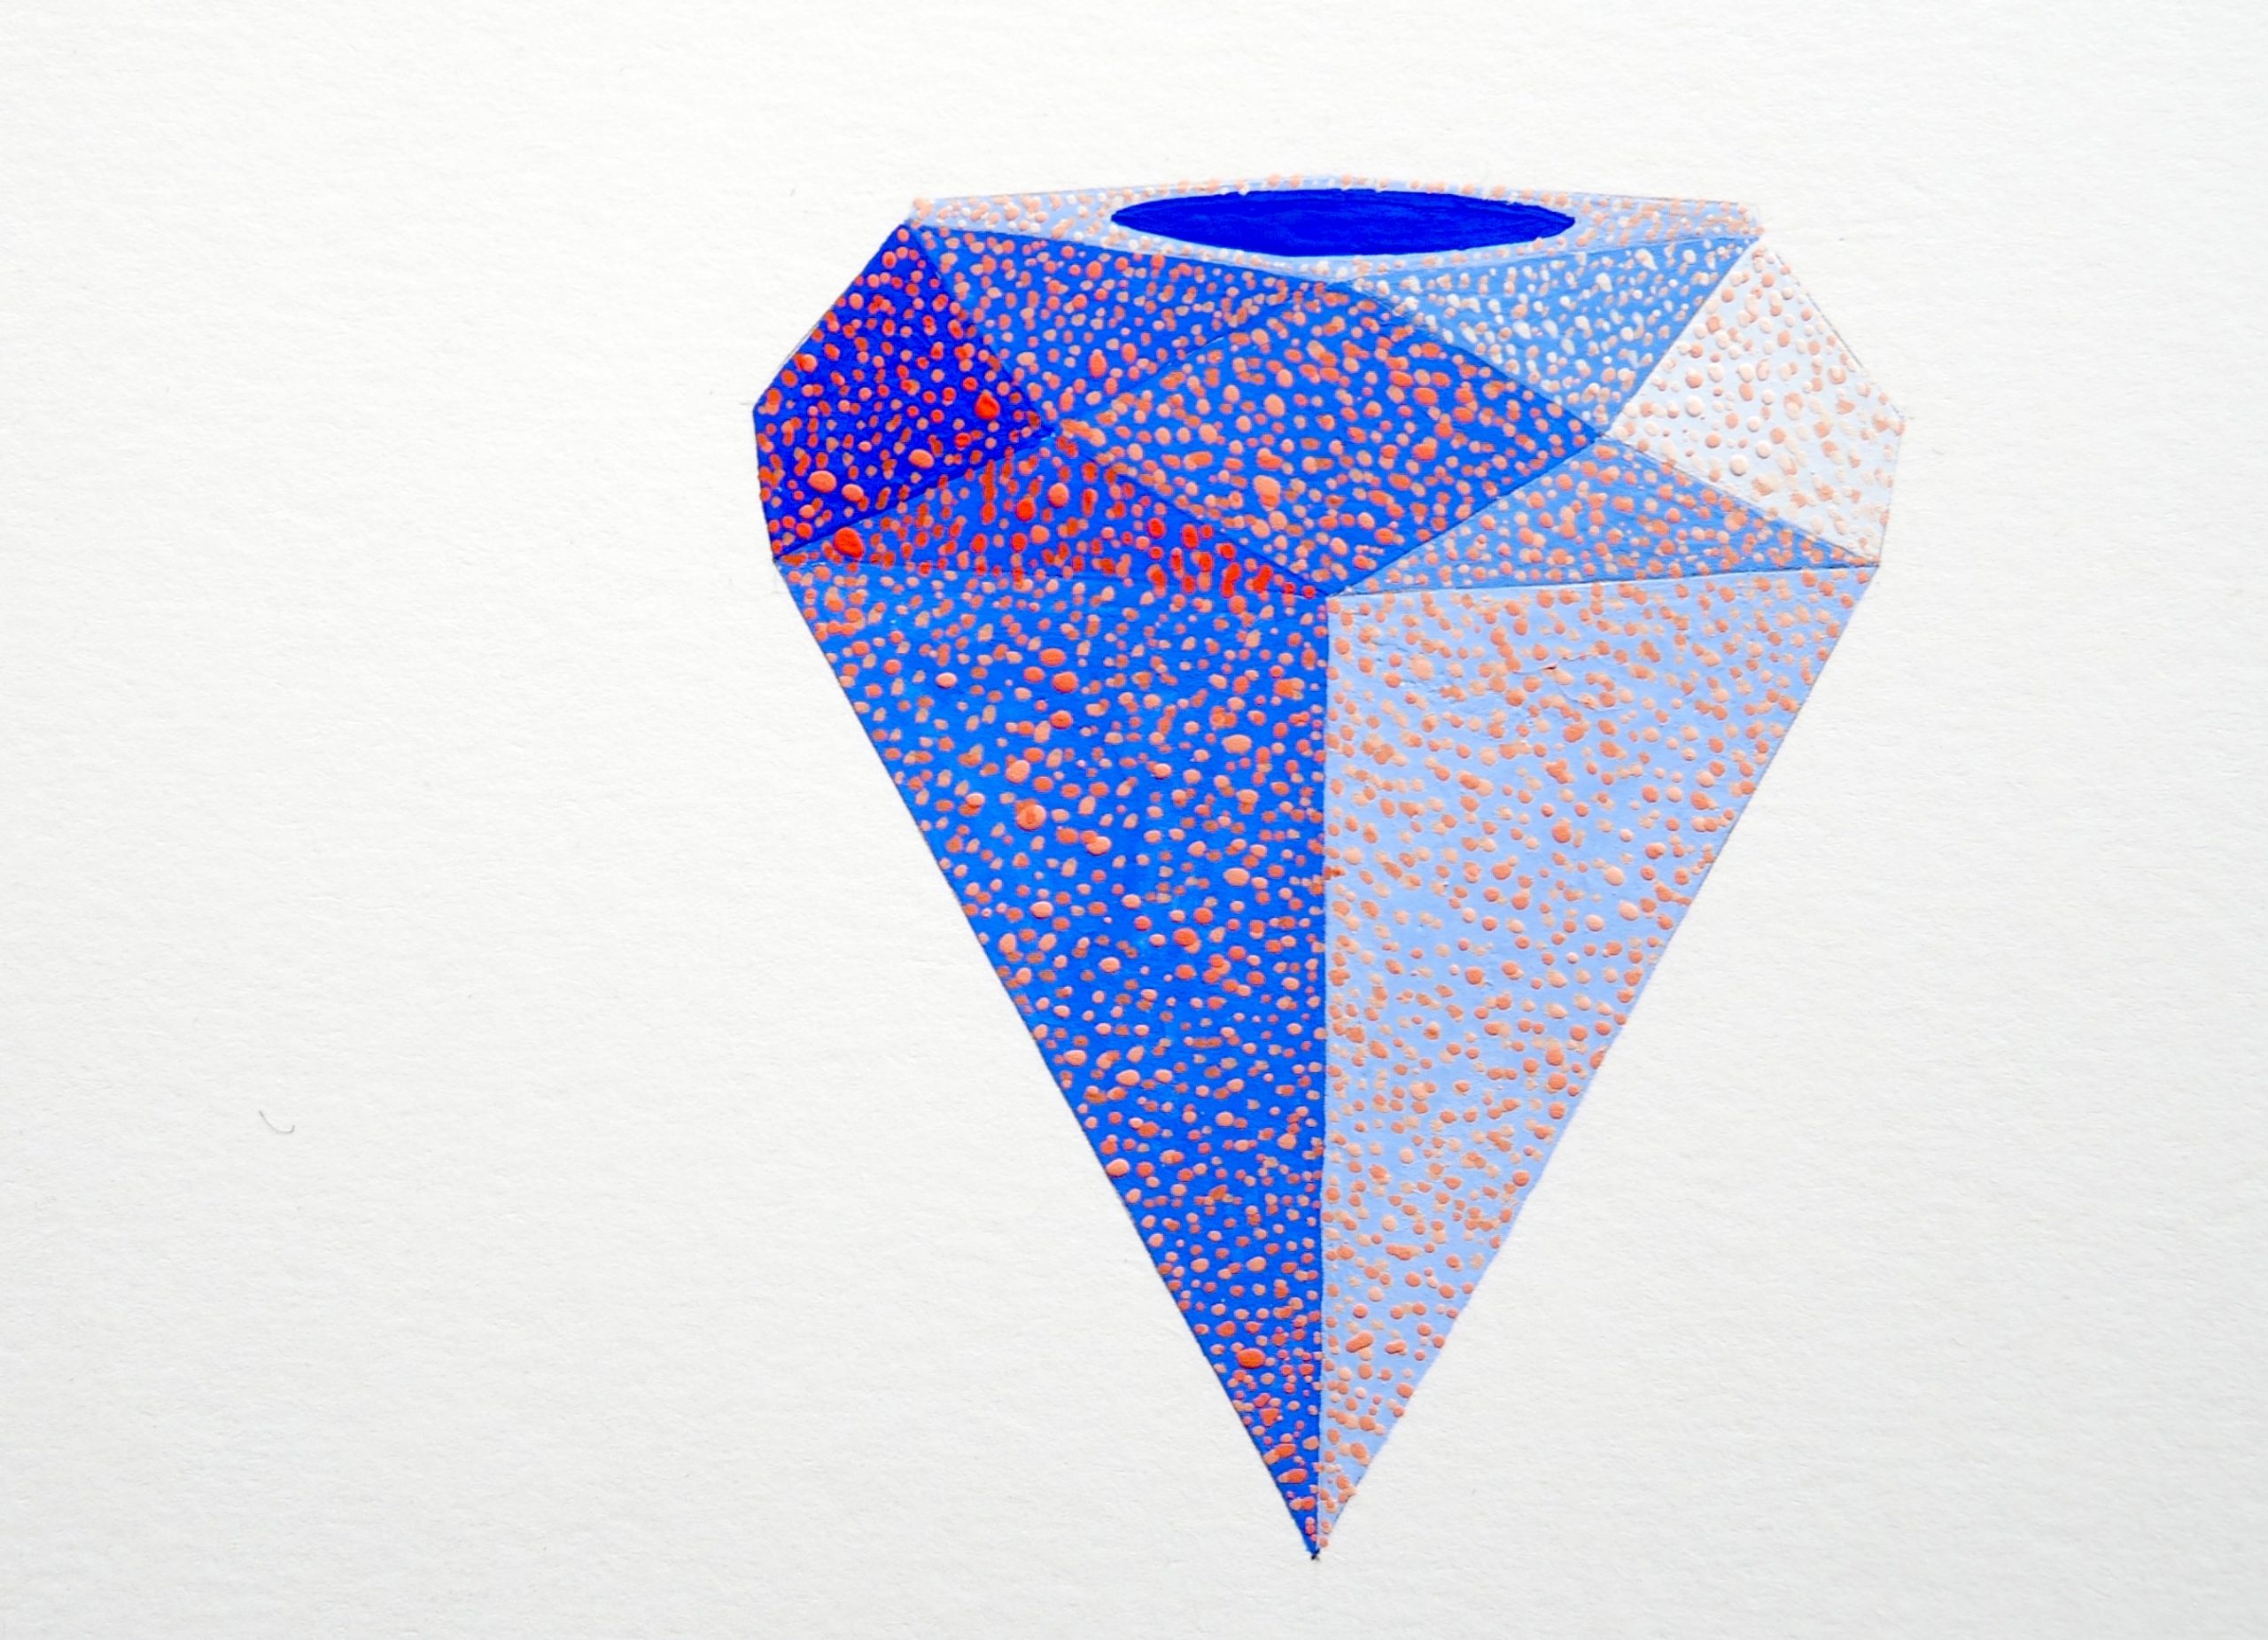 gouache painting of blue diamond with pink dots